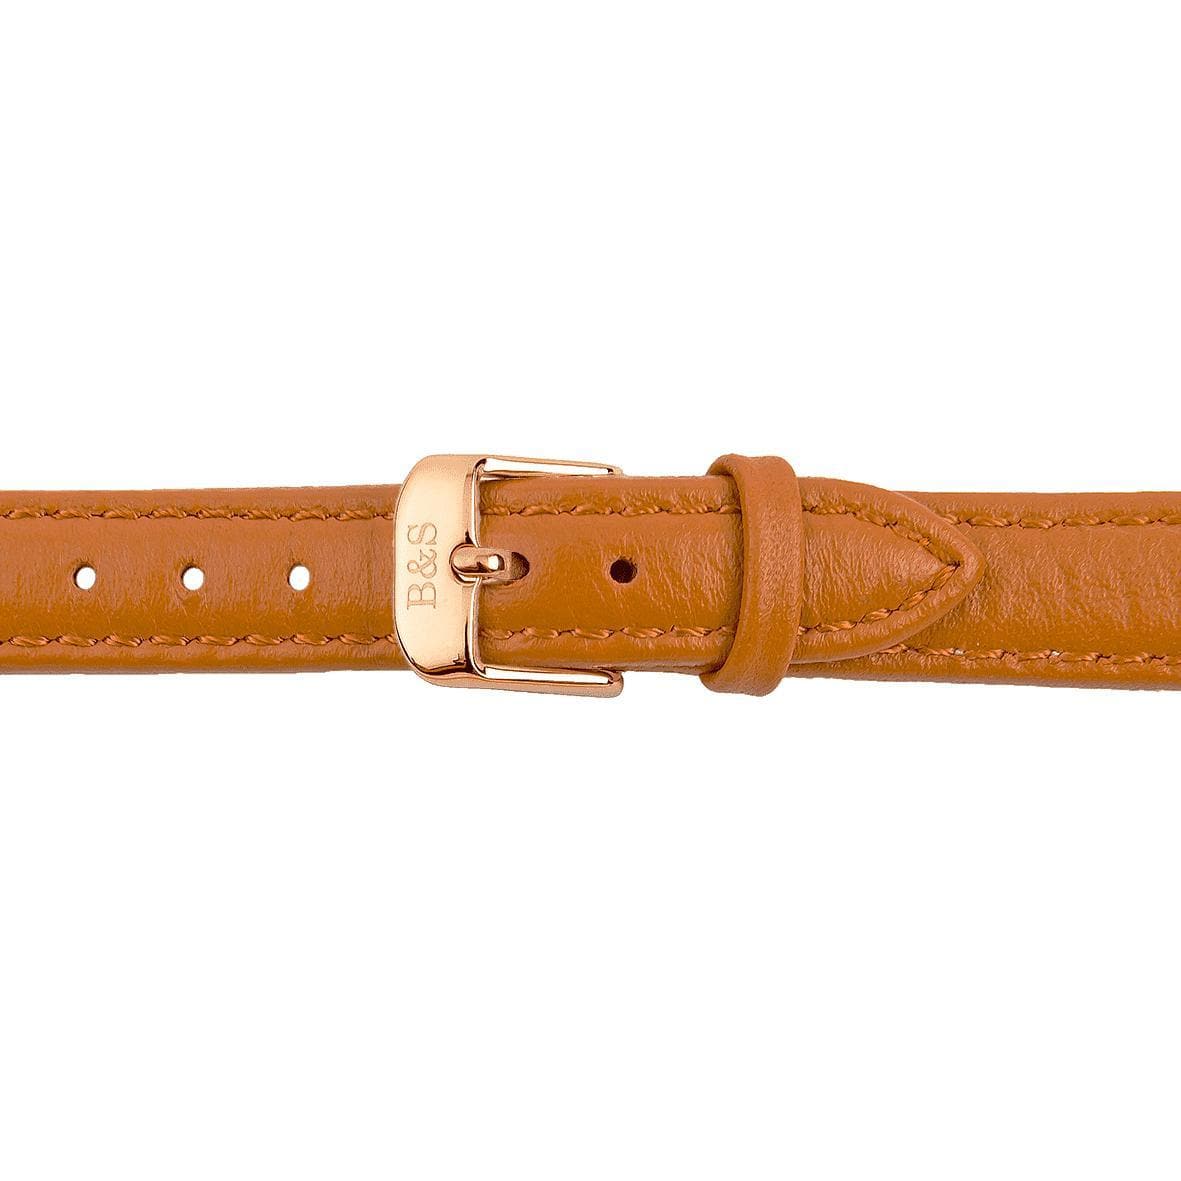 Brown Leather Strap & Rose Gold Buckle - Brother & Sisters